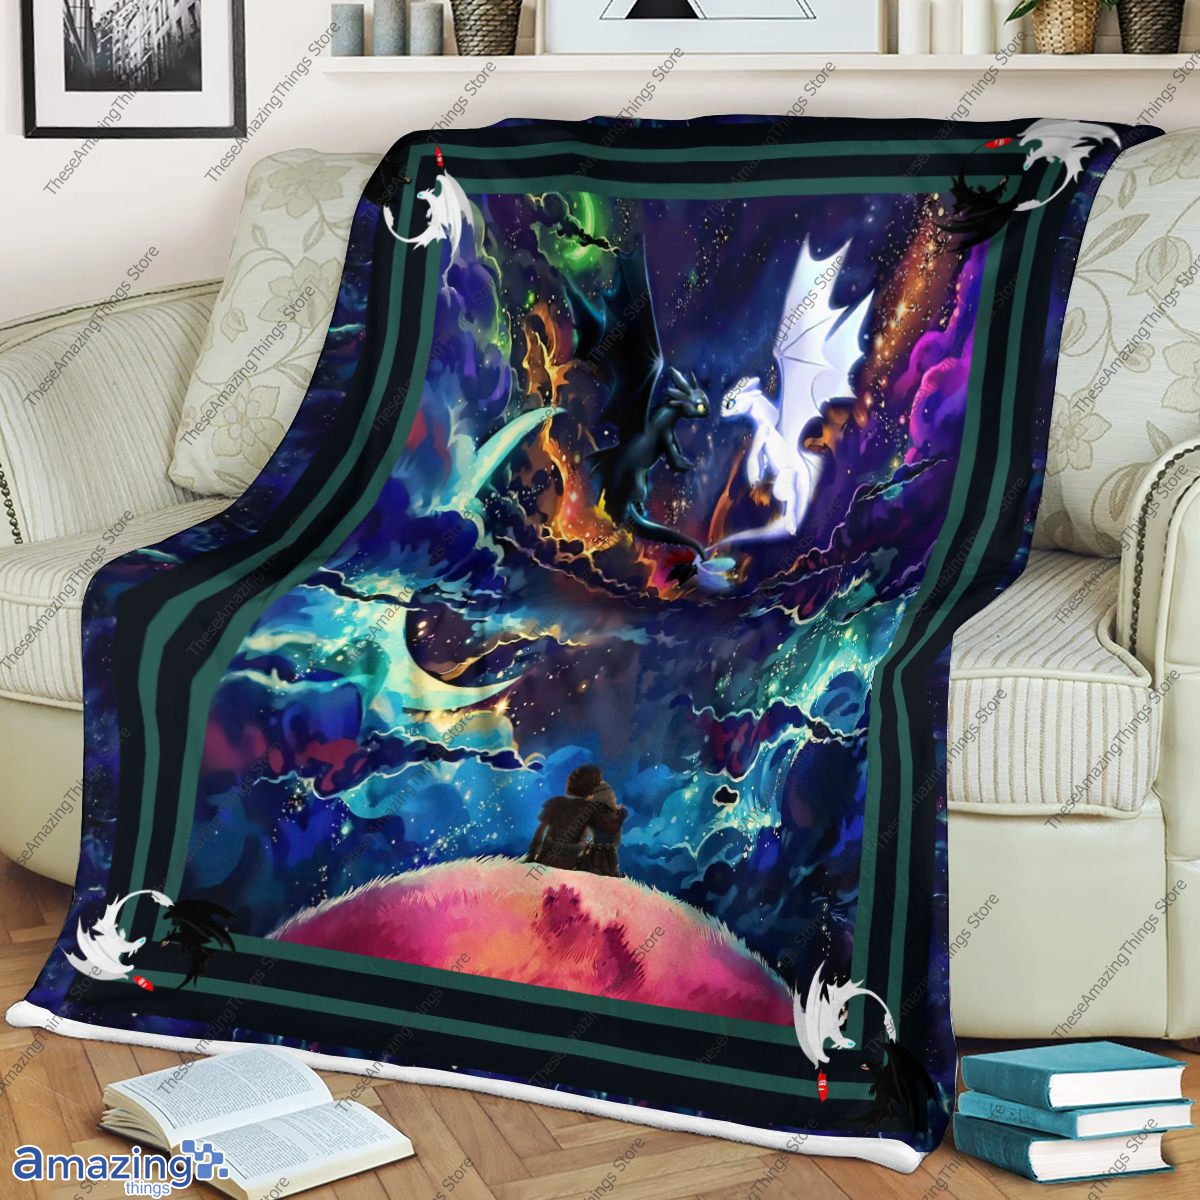 1,130150CM Kids How to Train Your Dragon Theme Quilt Blanket for Kids Bedding Throw Soft Warm Thin Blanket with Cotton Quilt 